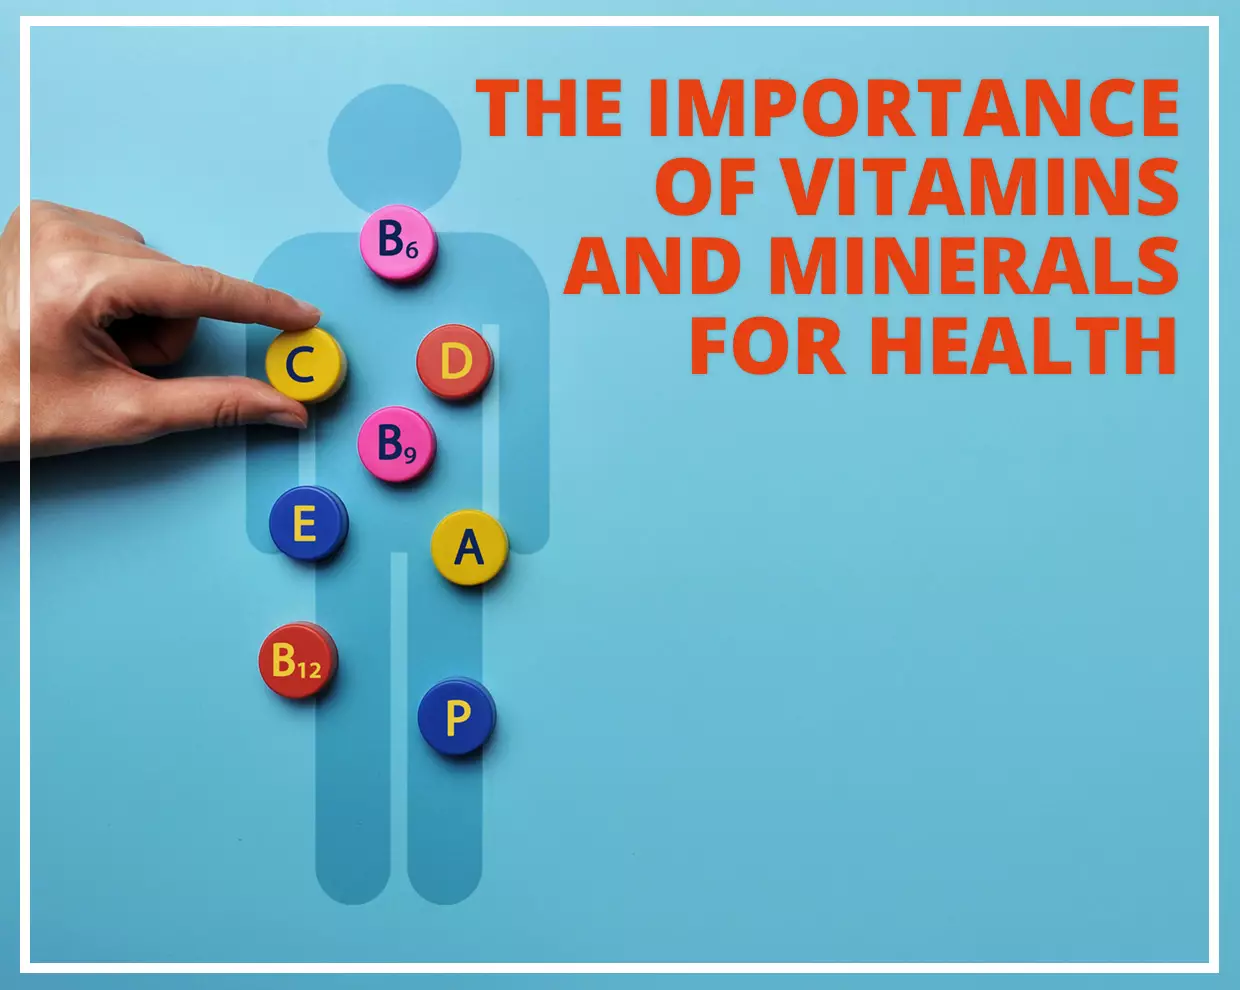 The Importance of Vitamins and Minerals for Health